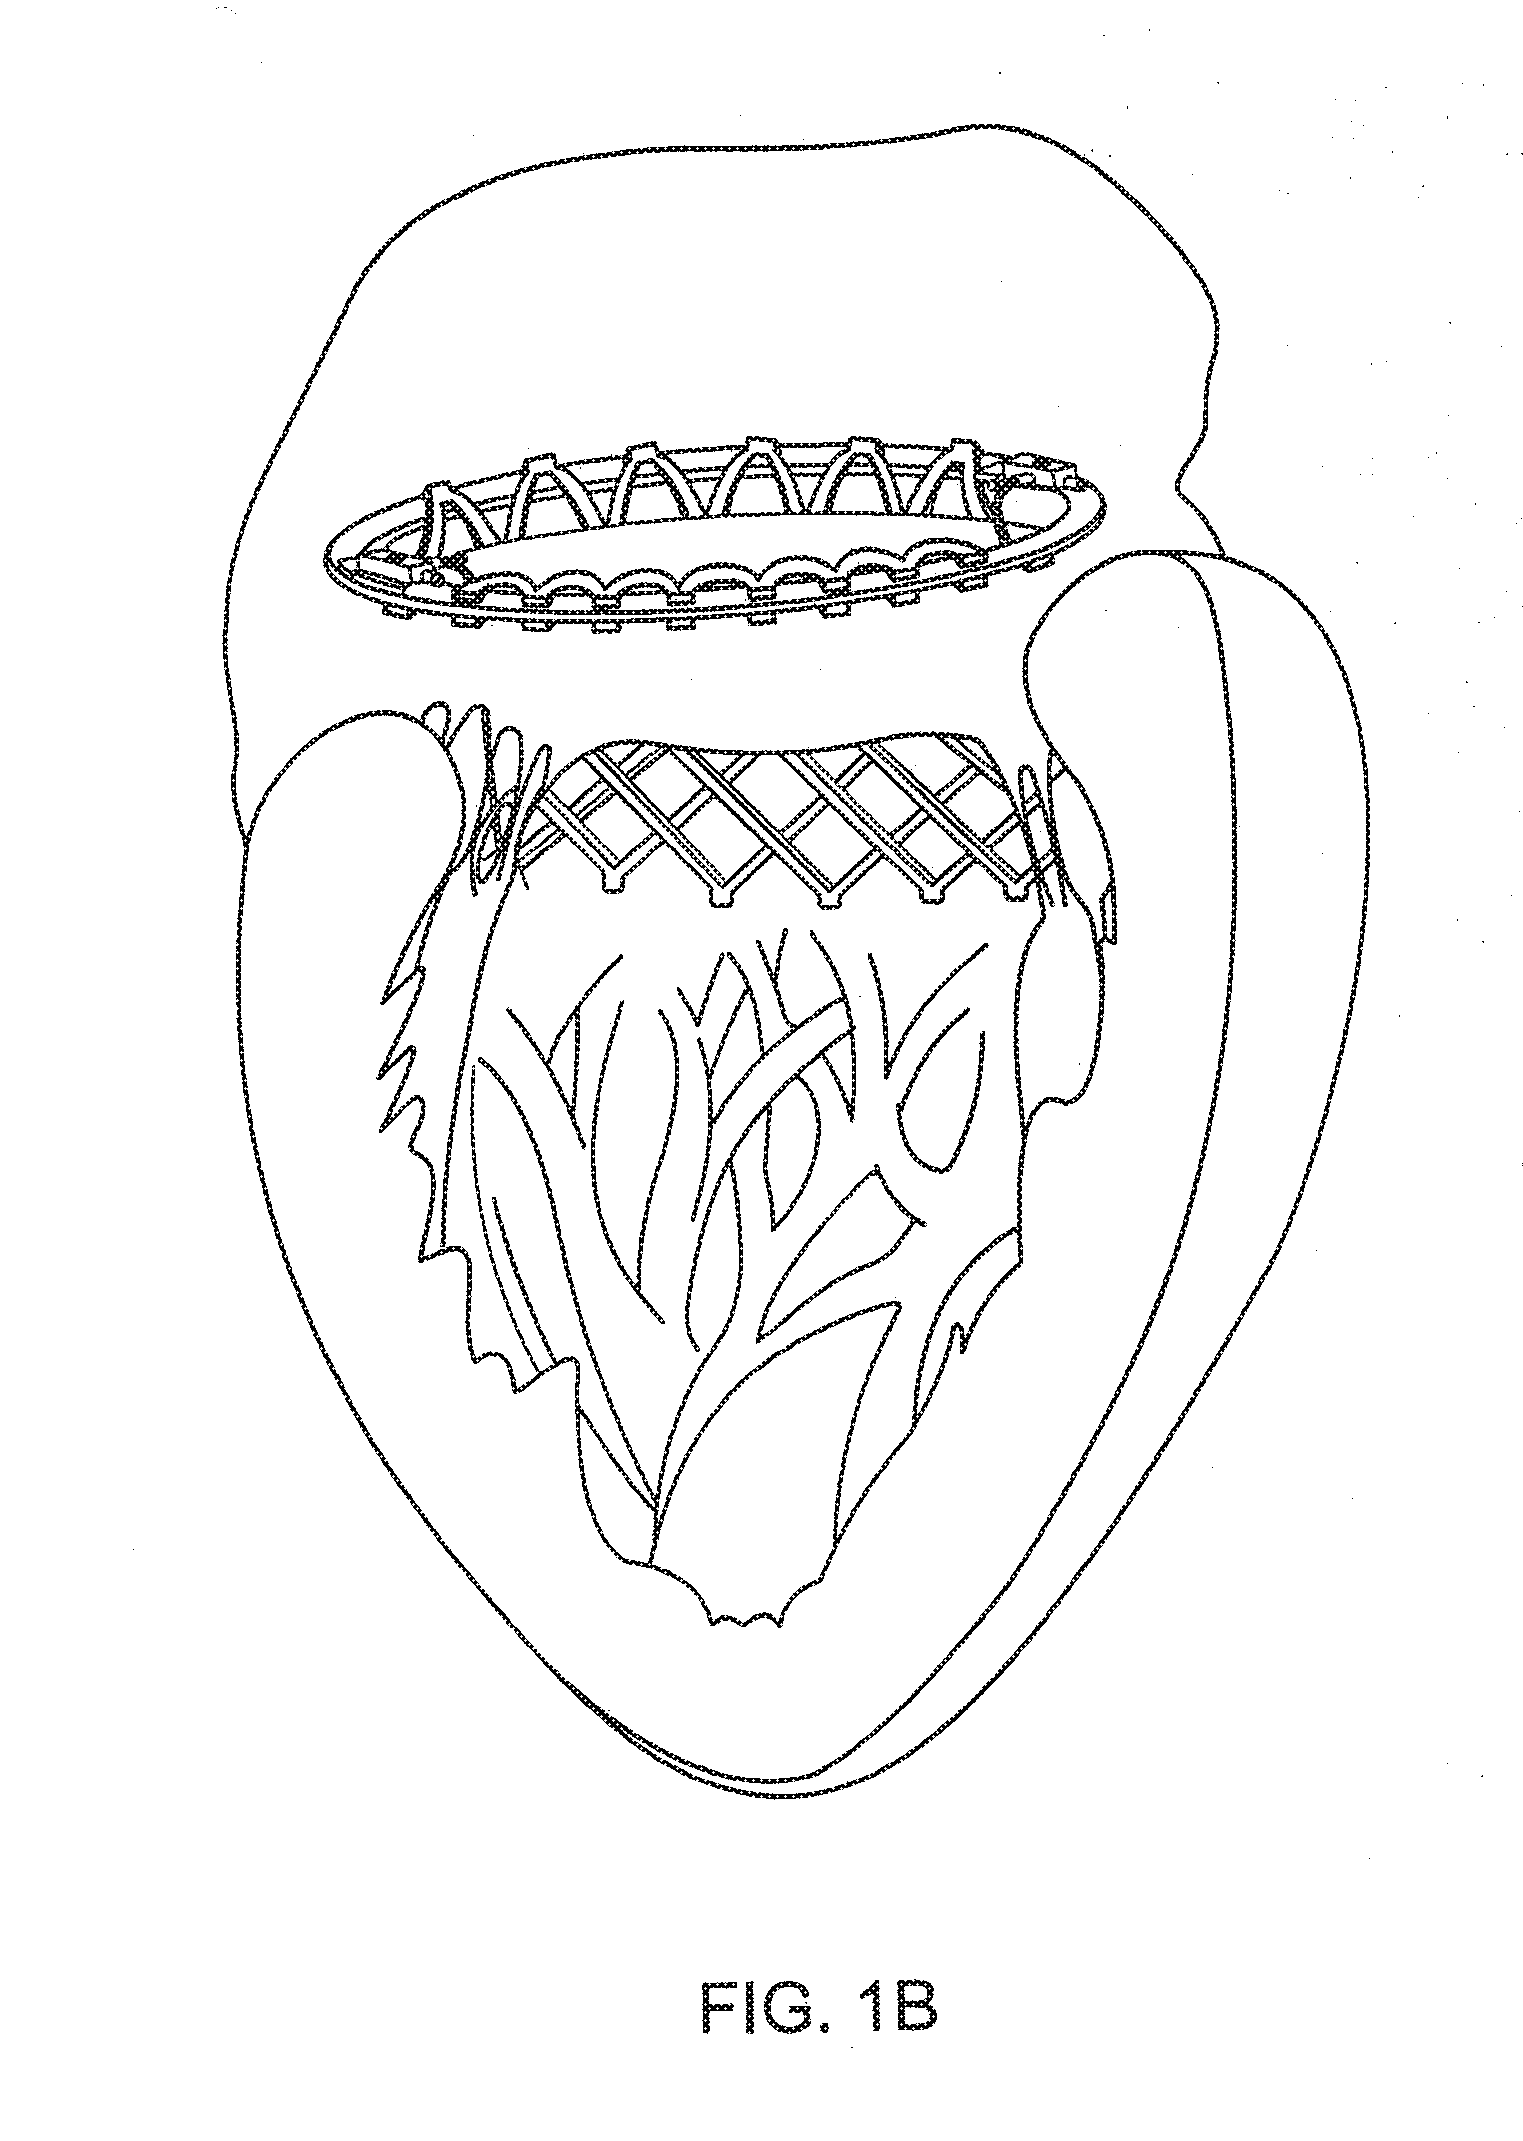 Stent With Mechanical Or Biological Heart Valve For Minimally Invasive Valve Replacement Procedure And Stent Application Device